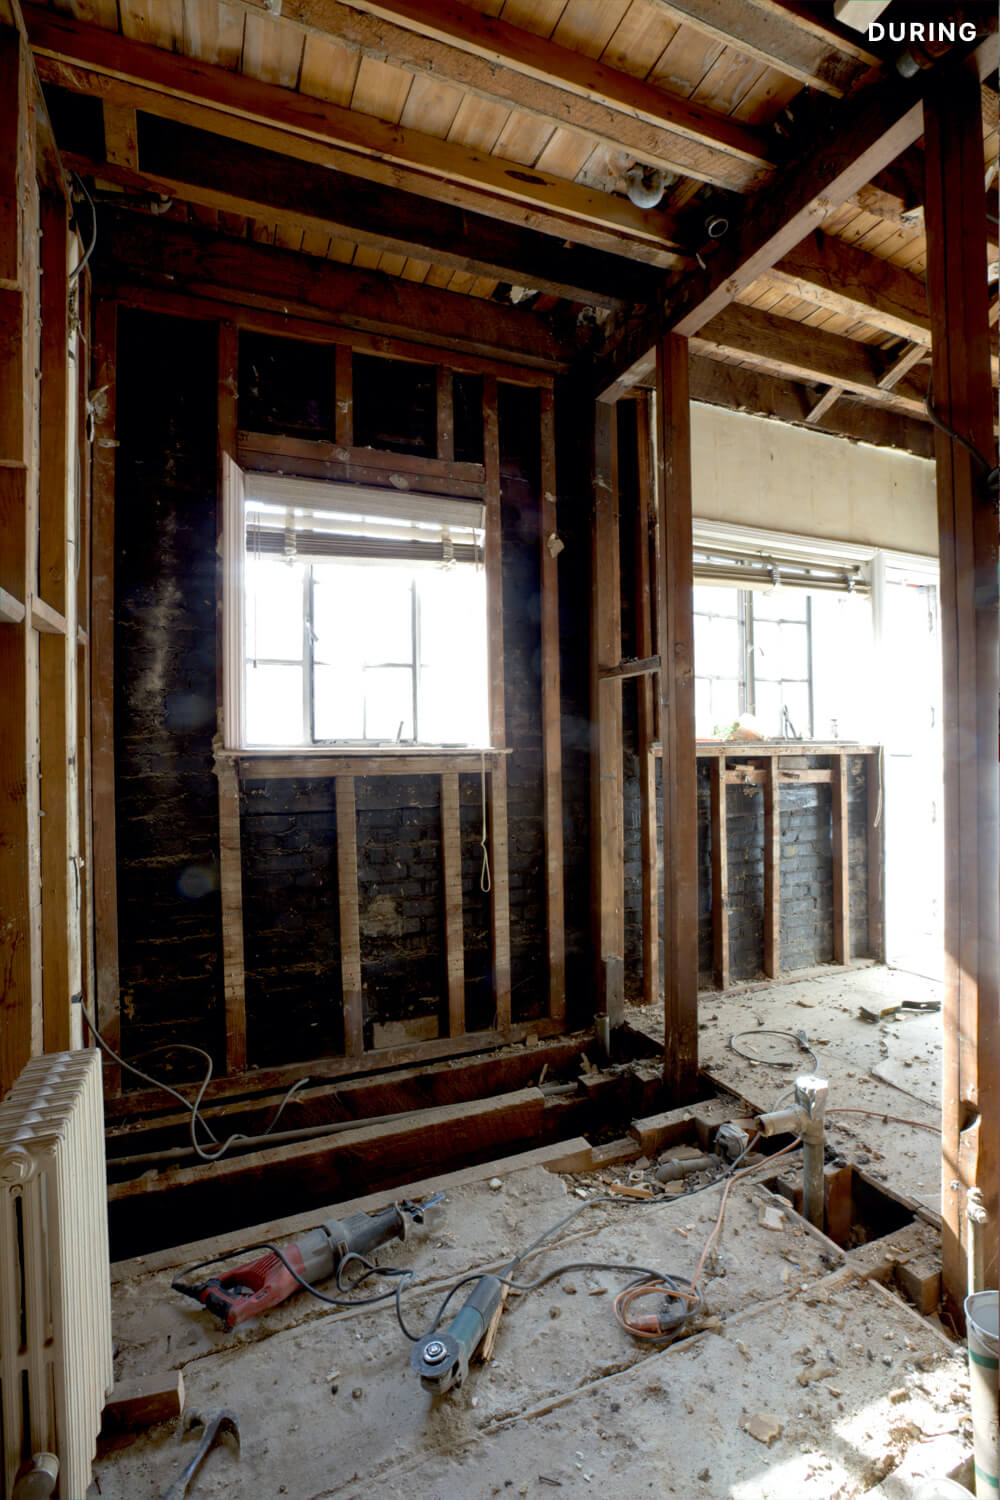 Image of the powder room during renovation 